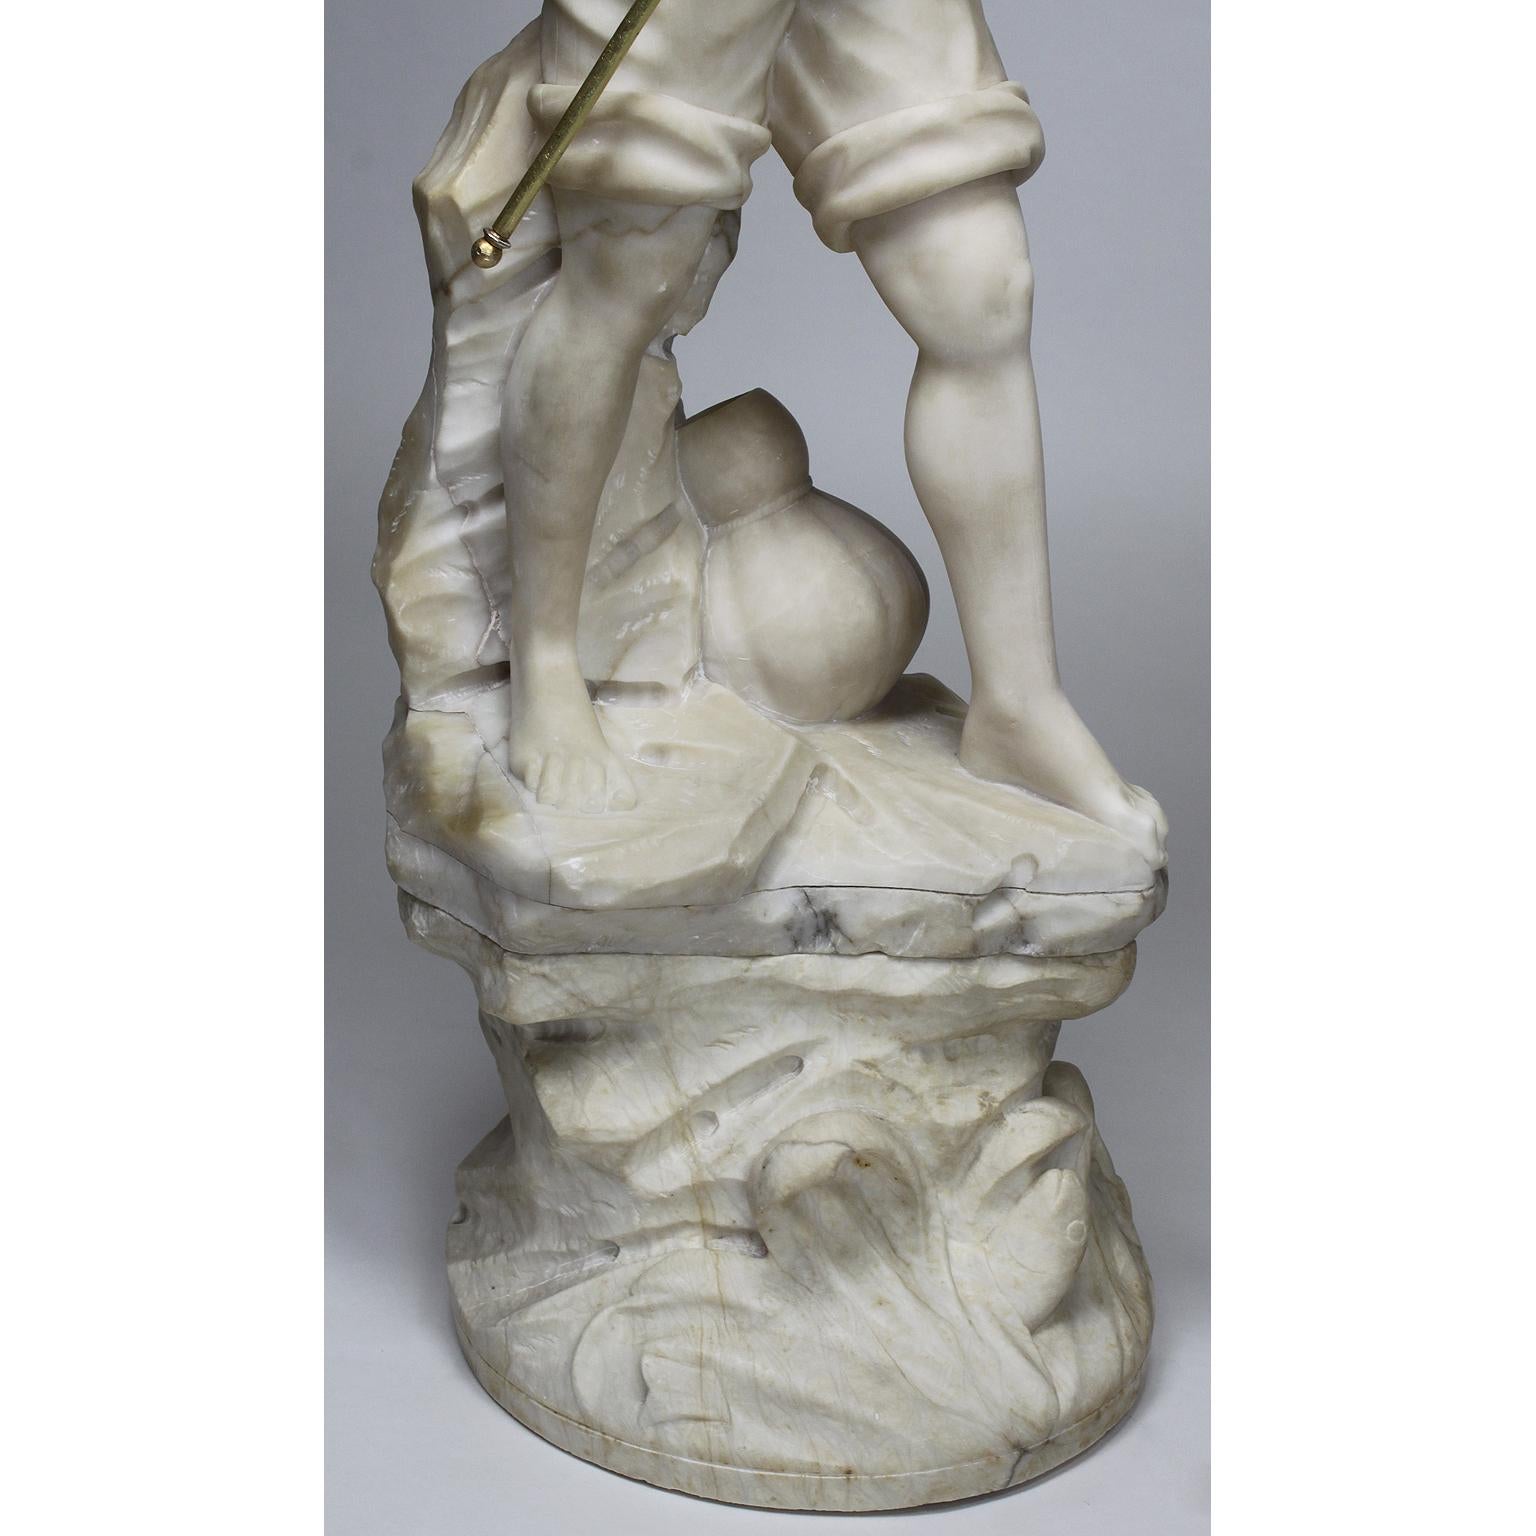 Charming Italian 19th-20th Century Carved Alabaster Figure of a Fisher Boy For Sale 9